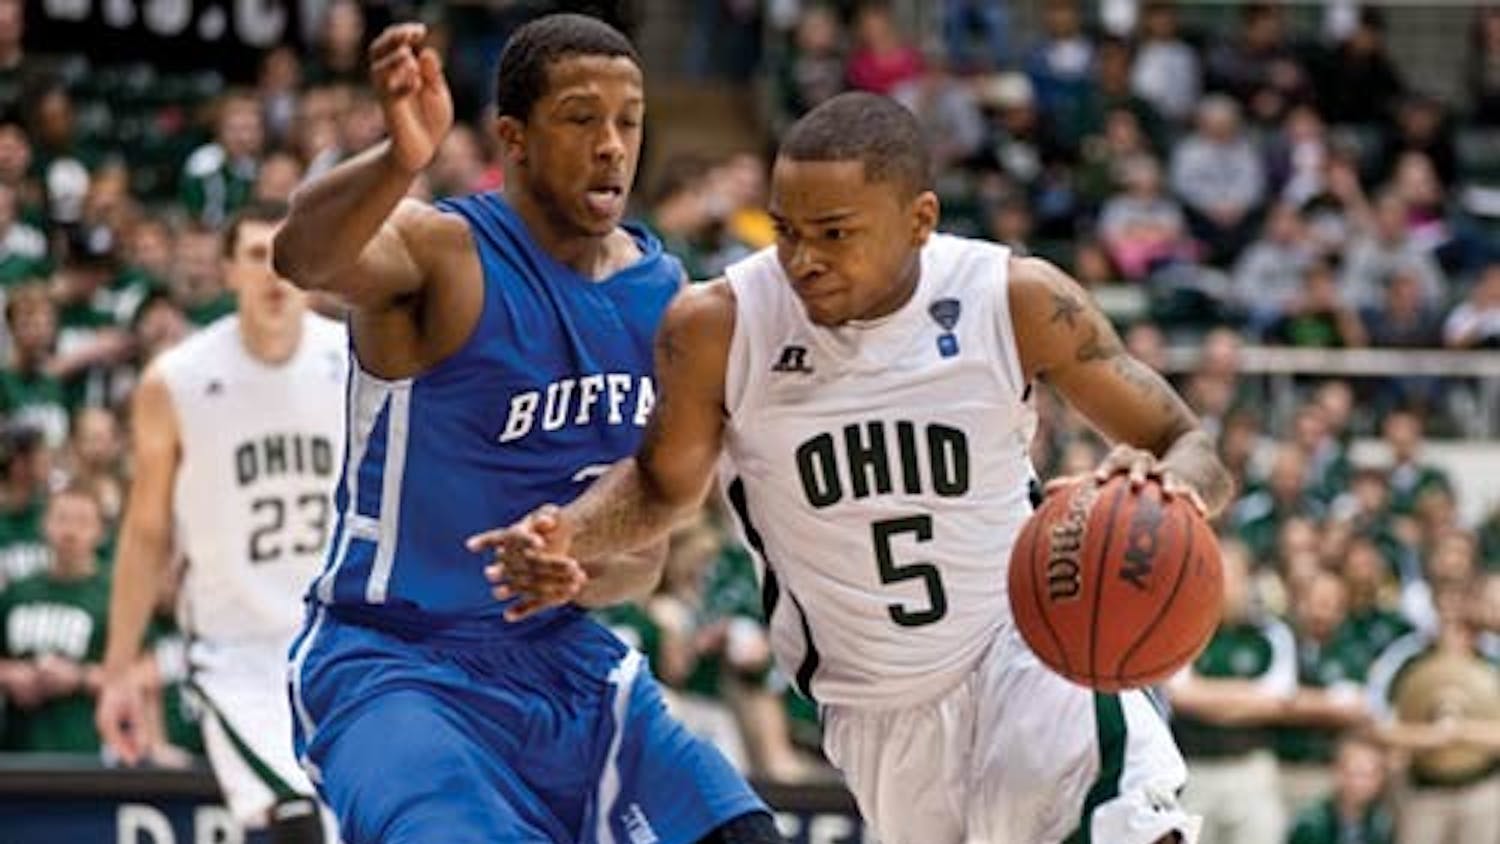 Men's Basketball: Akron, Ohio too close for comfort?  